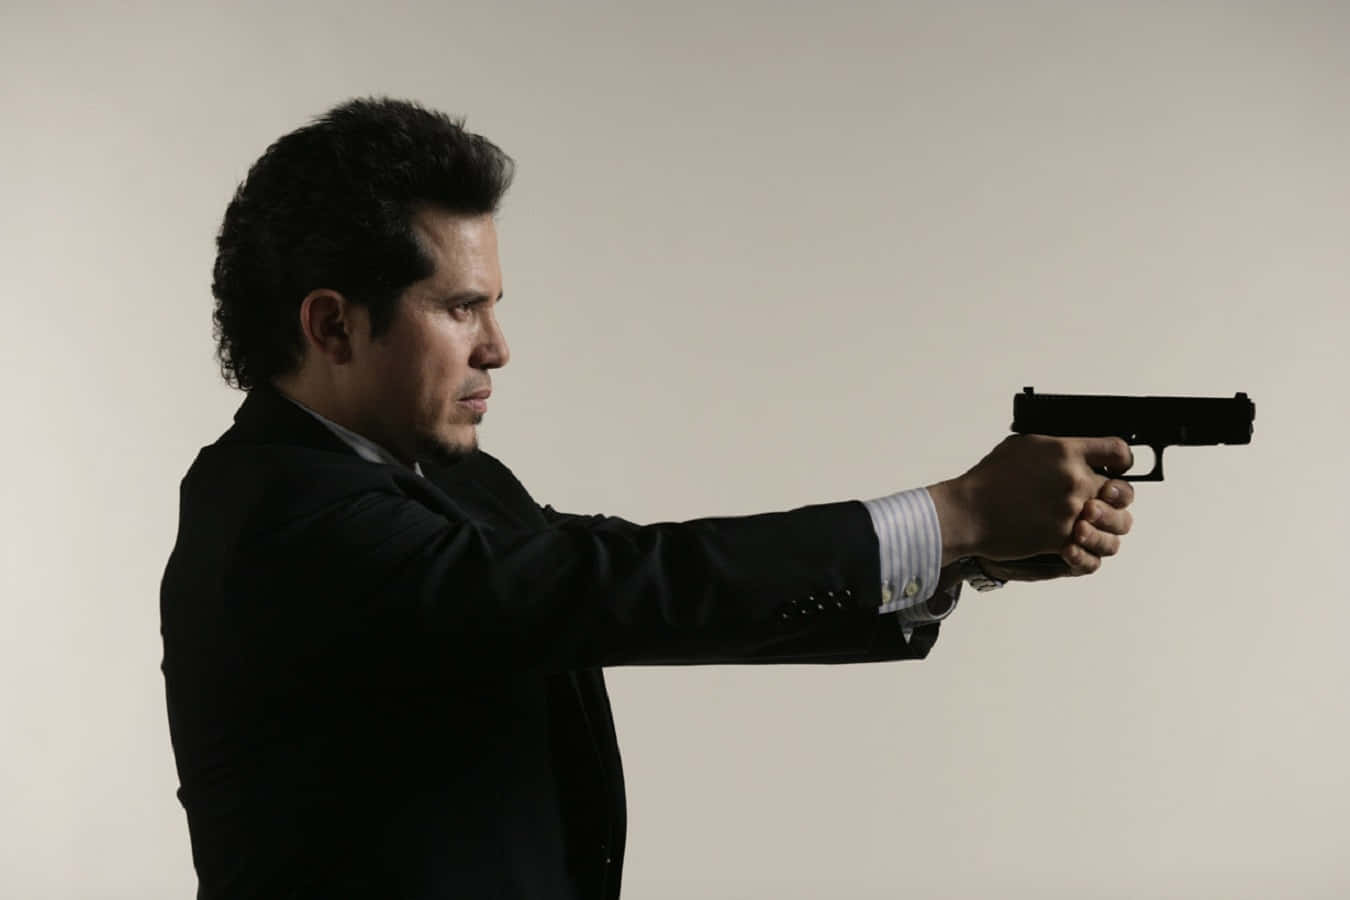 Actorjohn Leguizamo Is Best Known For His Versatile Performances In Both Film And Theater. He Has Appeared In A Wide Range Of Genres, Including Comedy, Drama, And Action. His Unique Style And Talent Have Made Him A Highly Respected And Sought-after Actor In The Industry. Whether It's Portraying A Memorable Character Or Delivering Powerful Monologues, Leguizamo Always Brings His A-game To Every Role. Fondo de pantalla